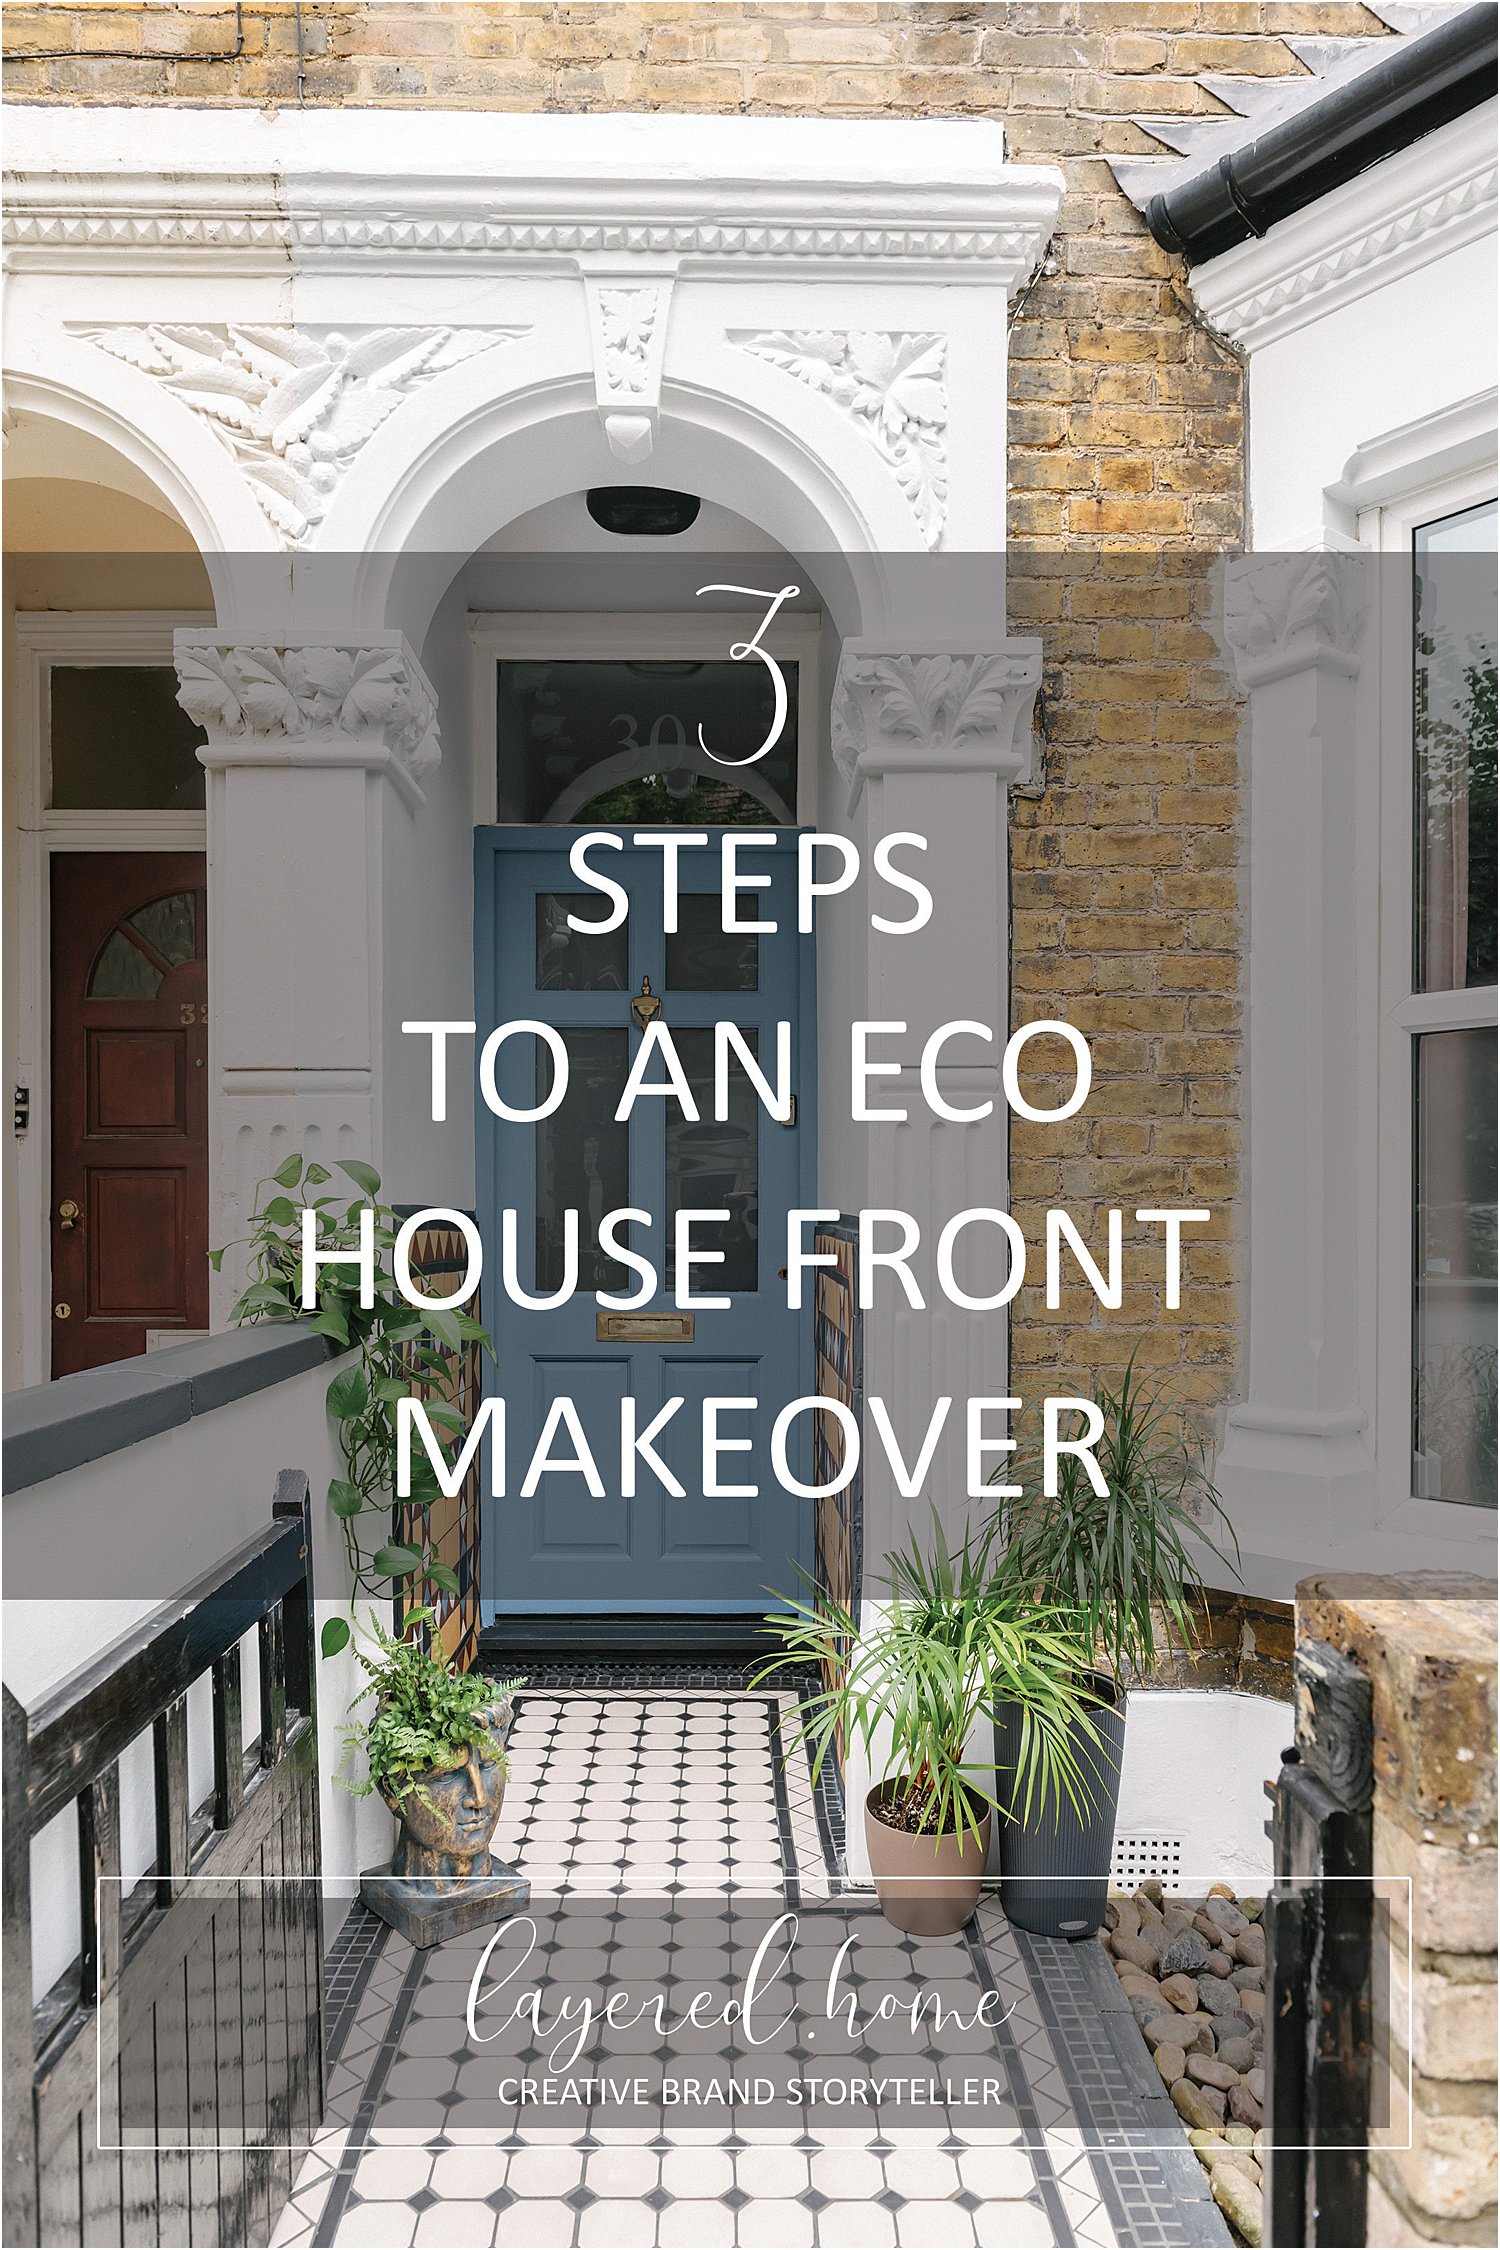 3-steps-to-a-fresh-eco-house-front-revamp-graphenstone